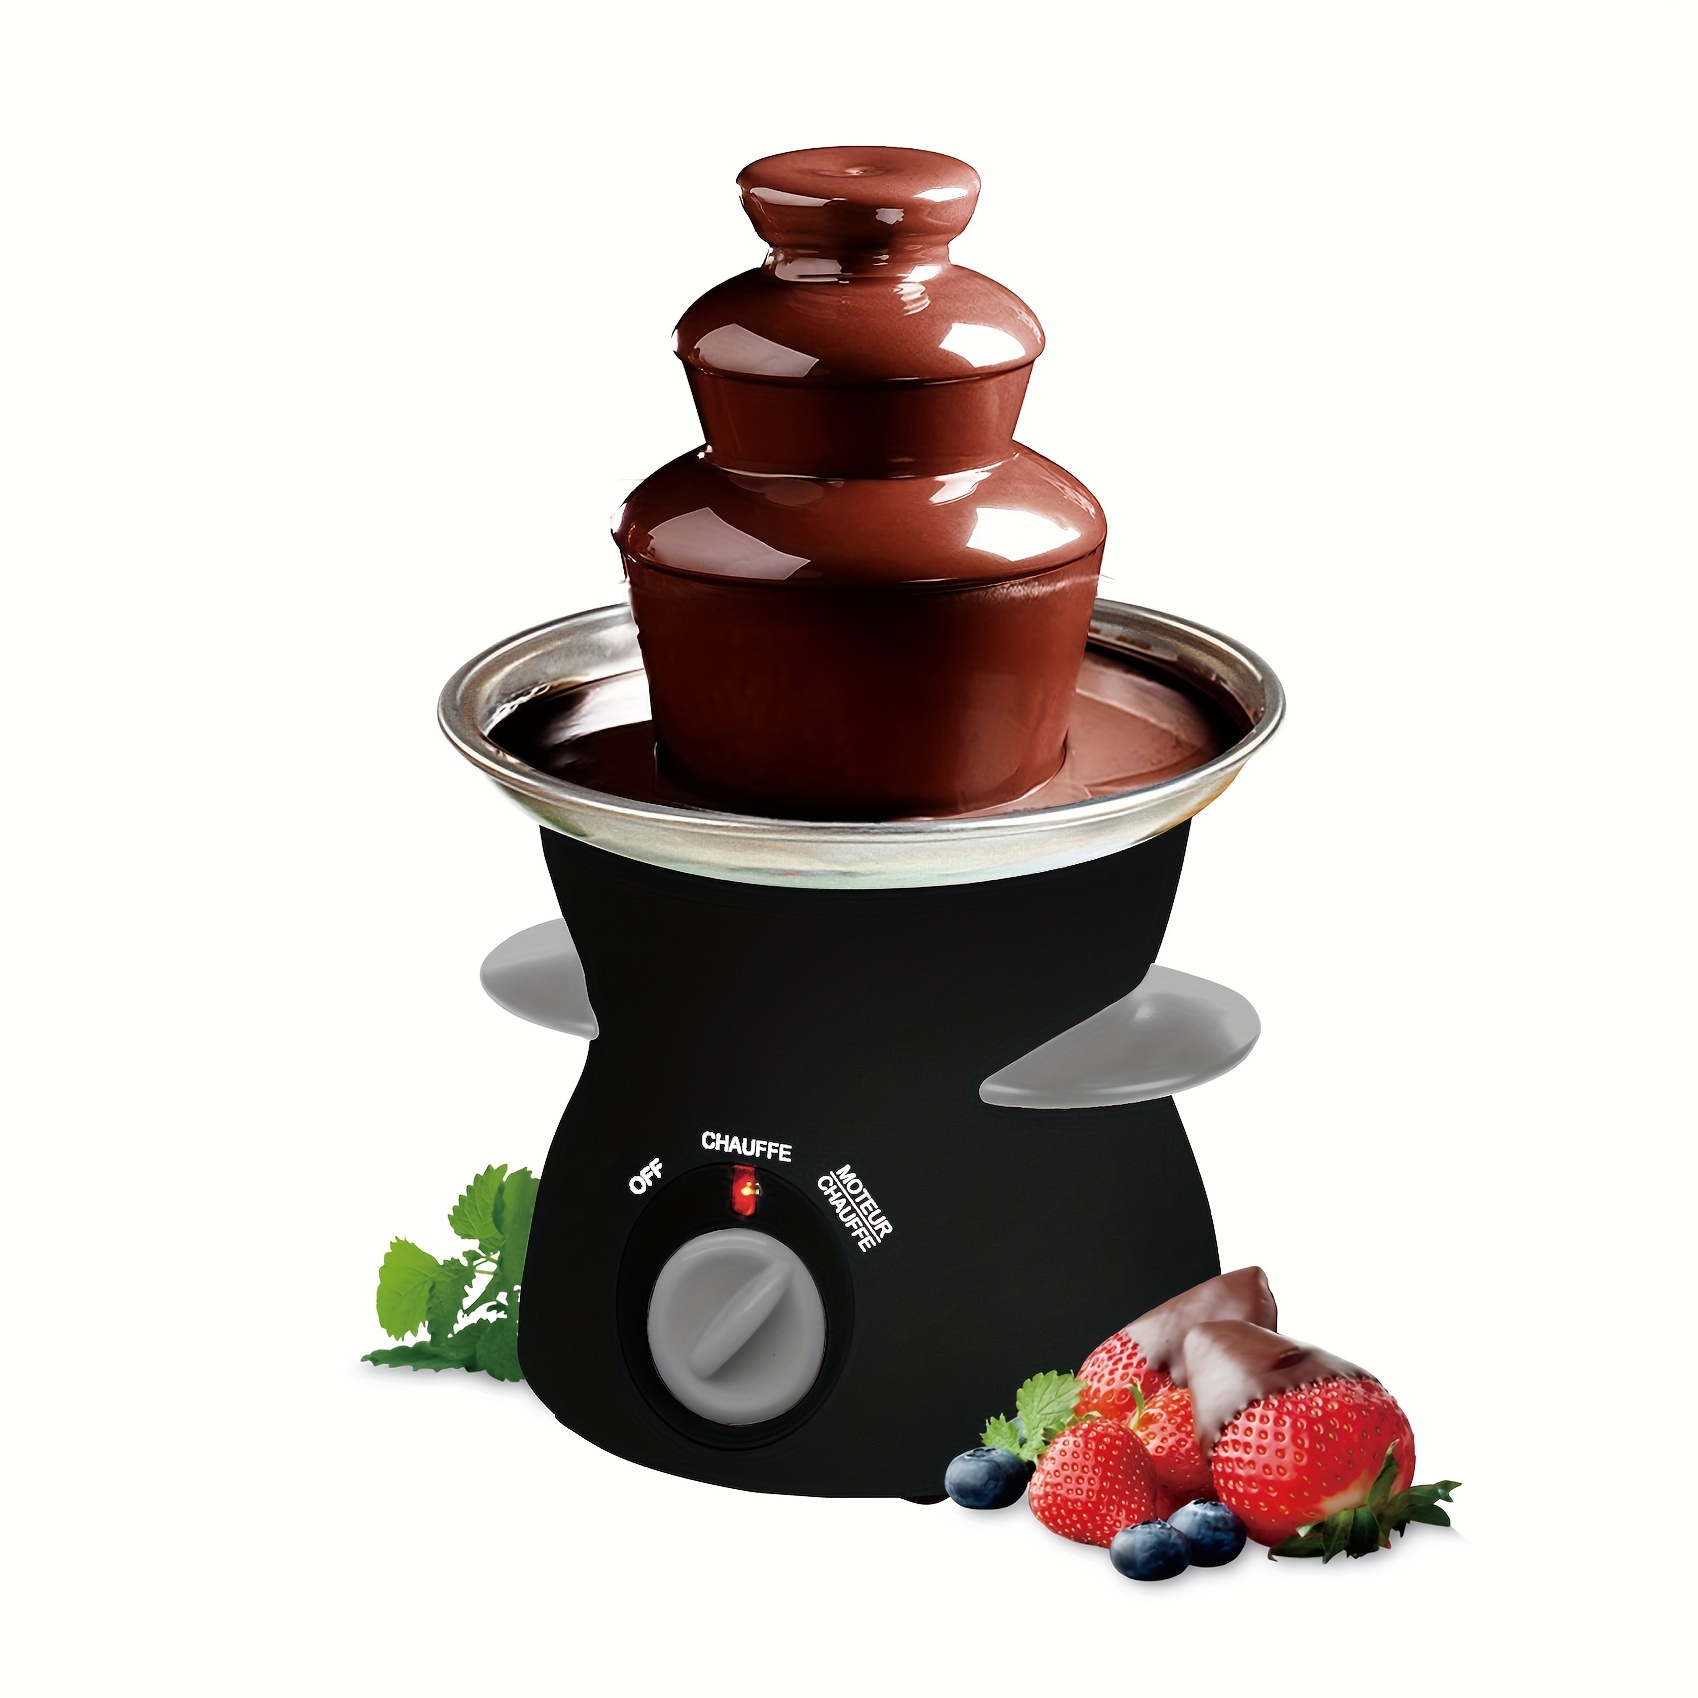 MultiOutools Mini Electric Fondue Pot Set With Dipping Forks, Chocolate  Melts Candy Melts Fondue Pot, Melting Chocolate Small Pot For Chocolate  Carame